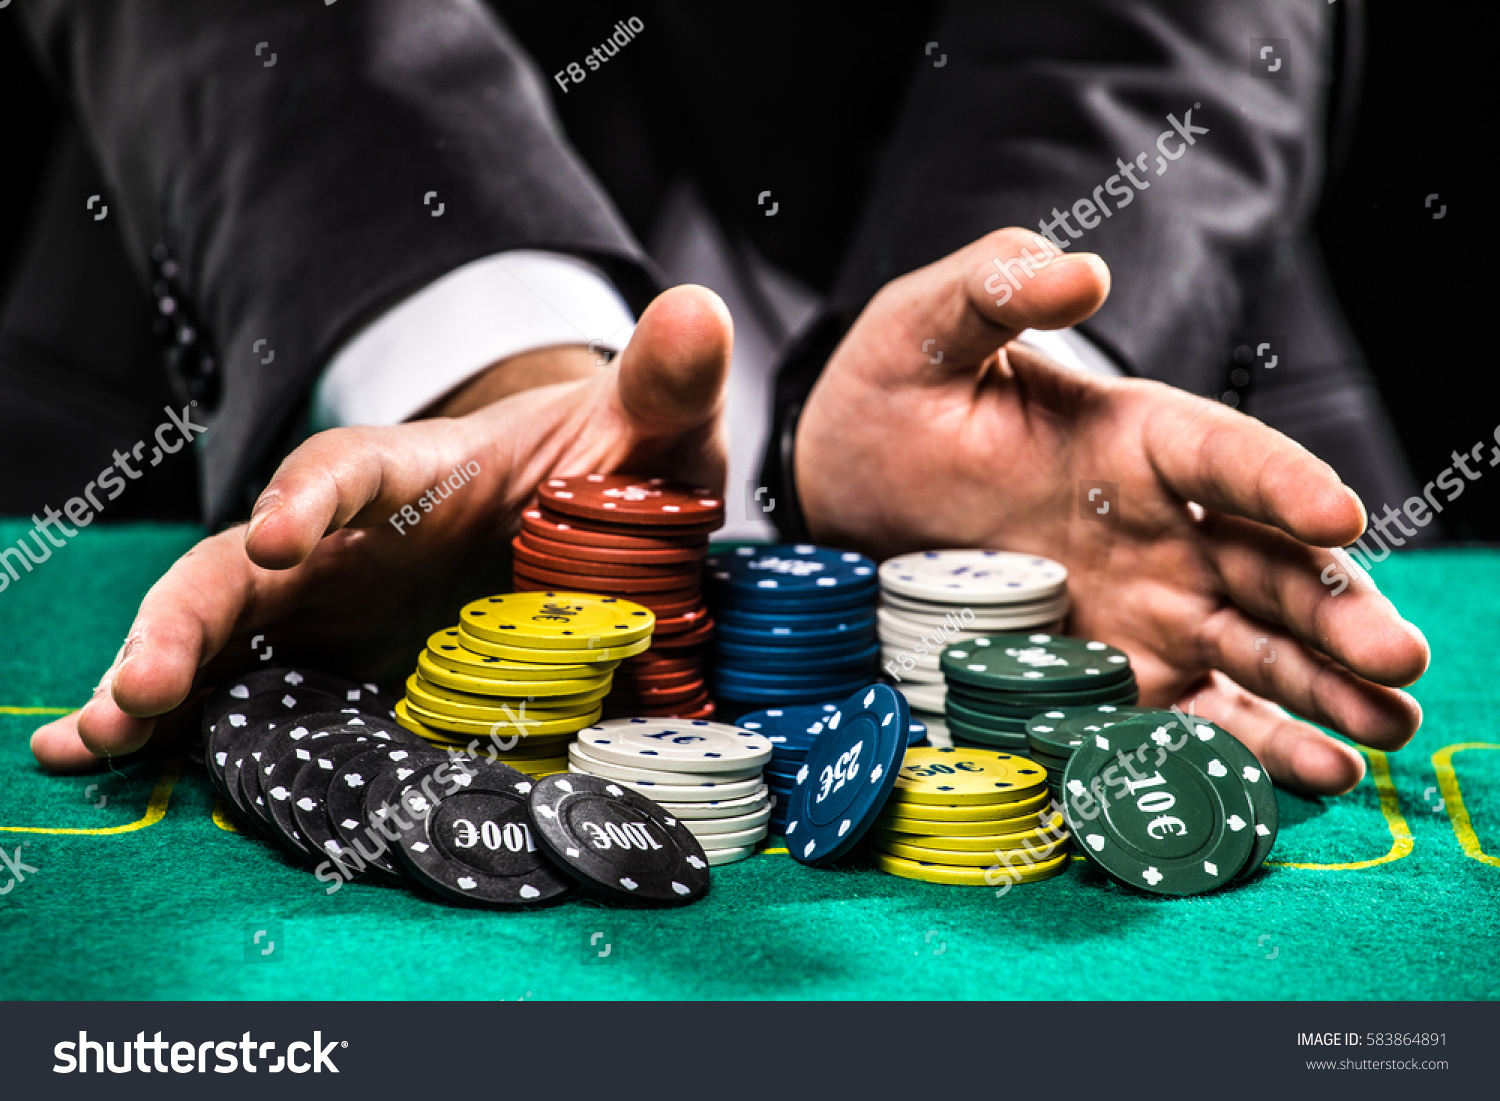 casino, gambling, poker, people and entertainment concept - close up of poker player with chips at green casino table #583864891